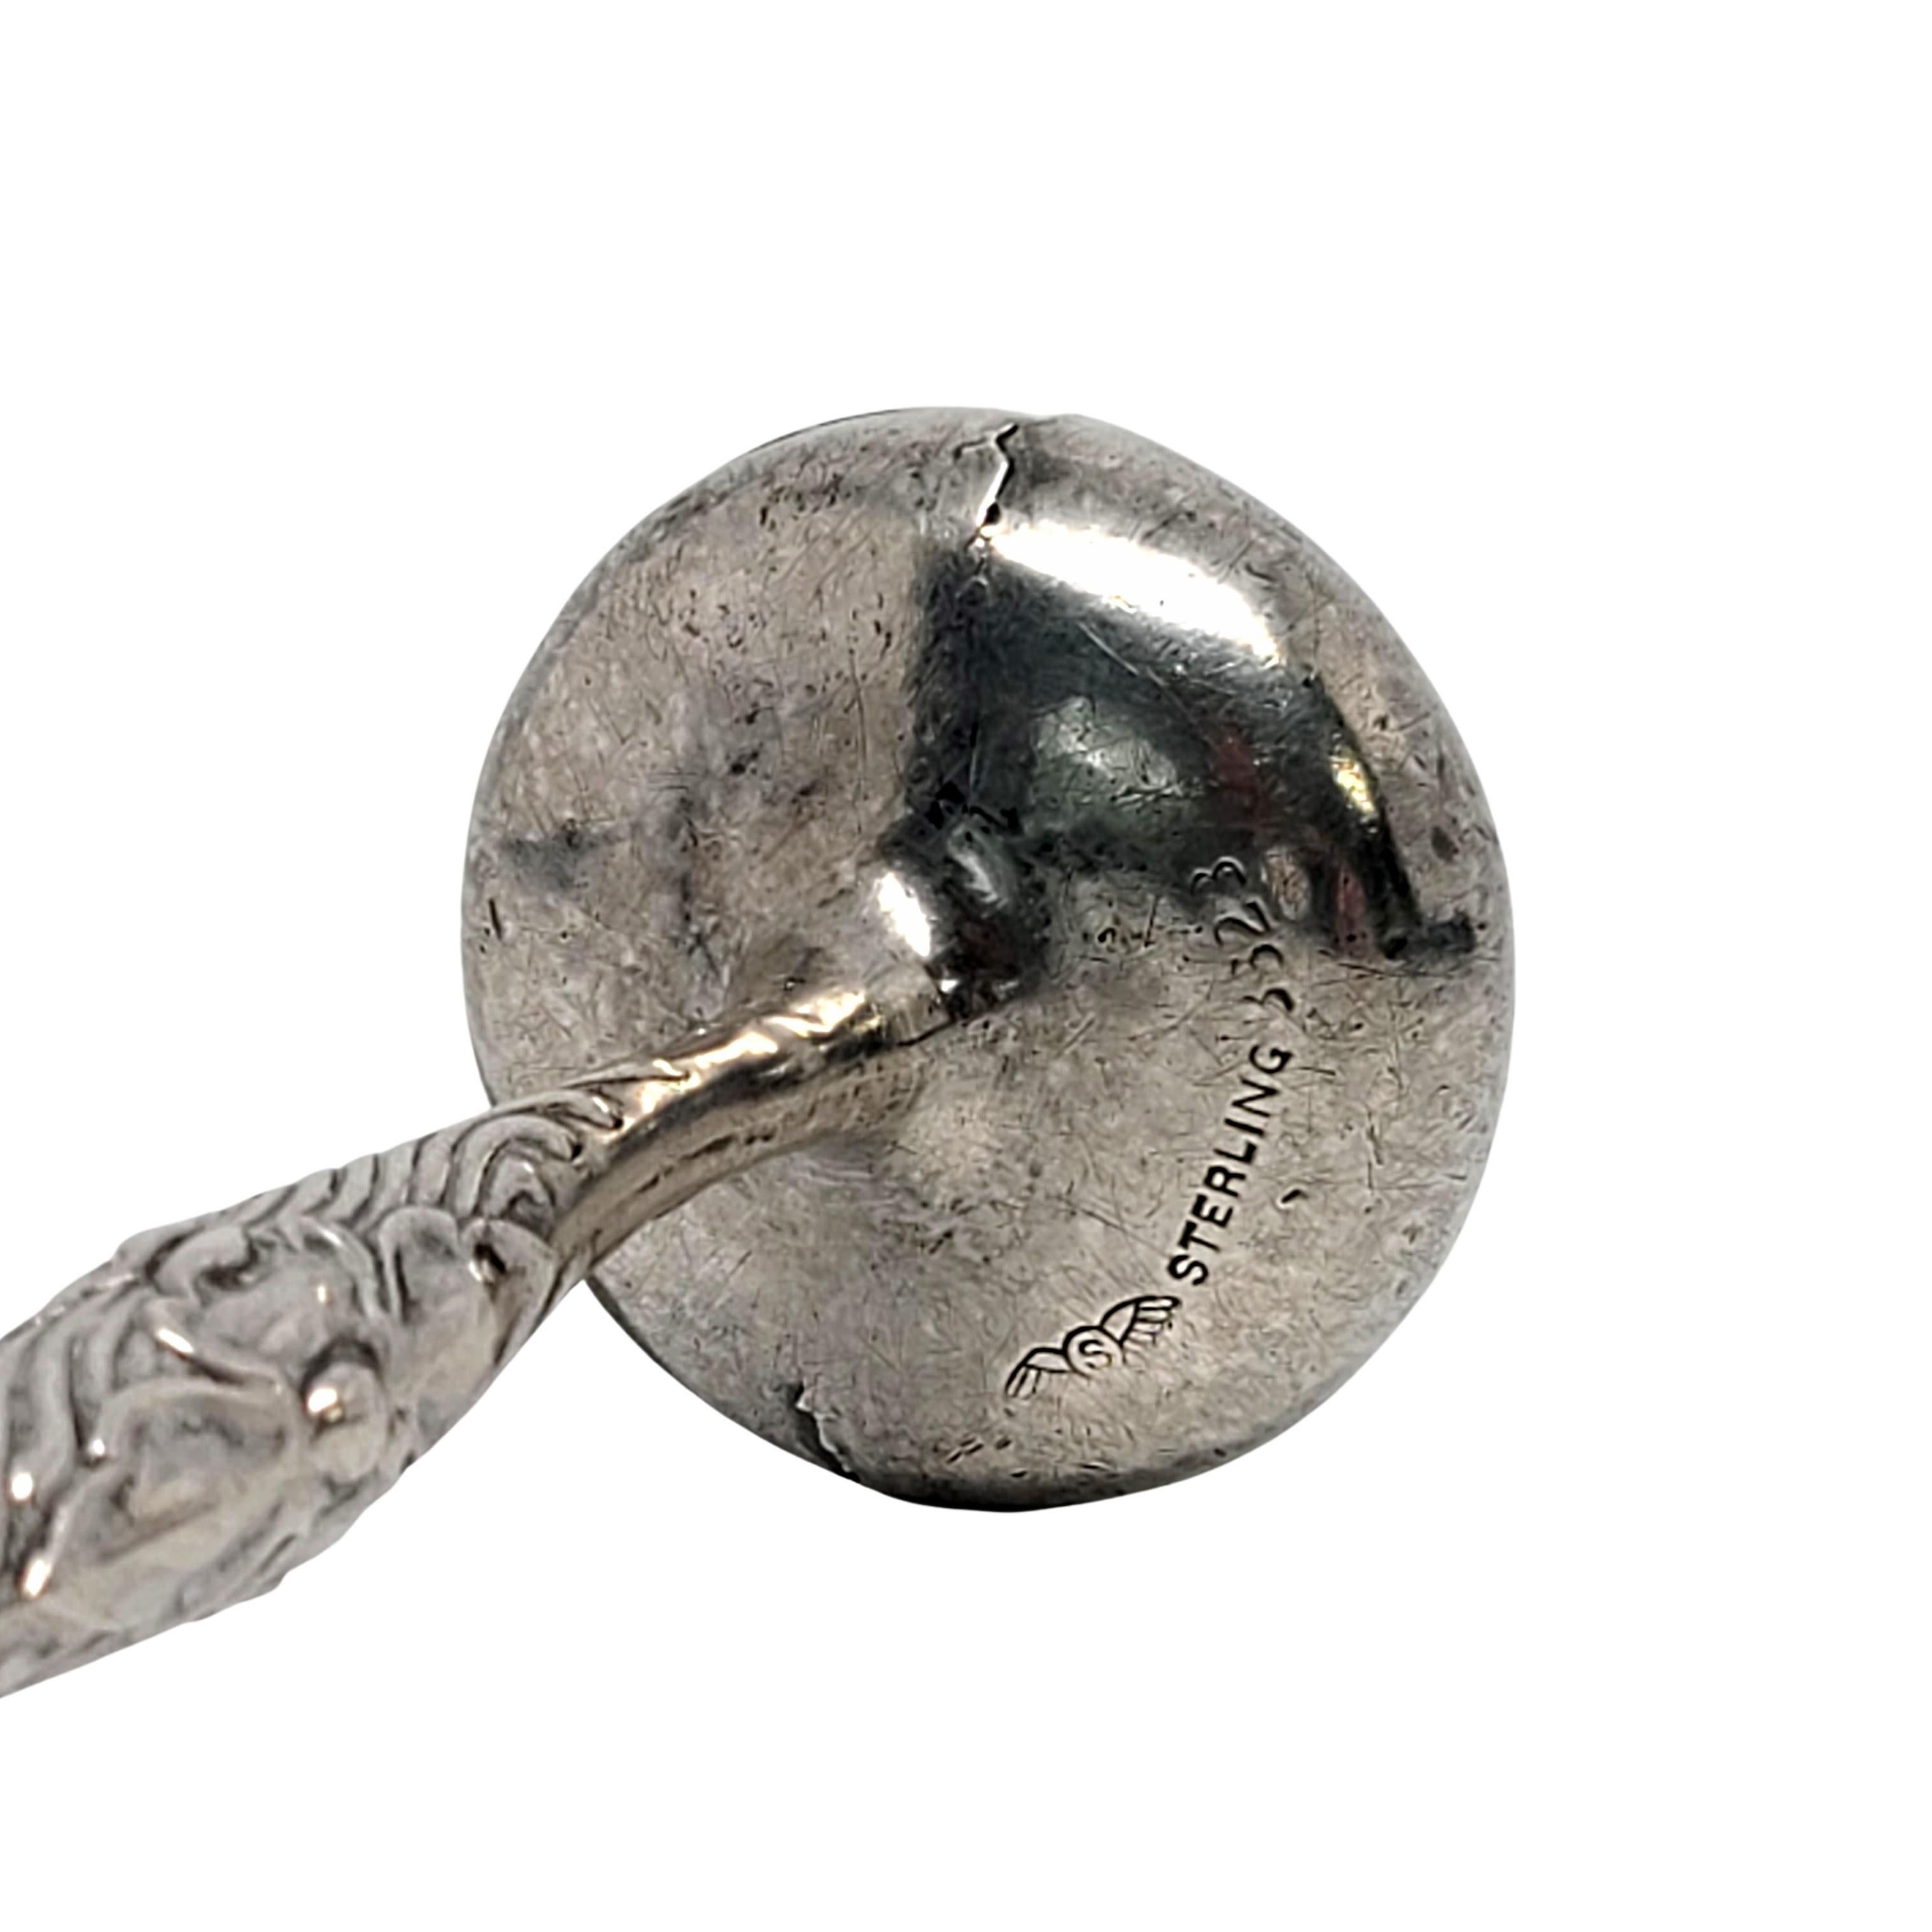 Women's or Men's George Shiebler Sterling Silver Jingle Bell Baby Rattle For Sale